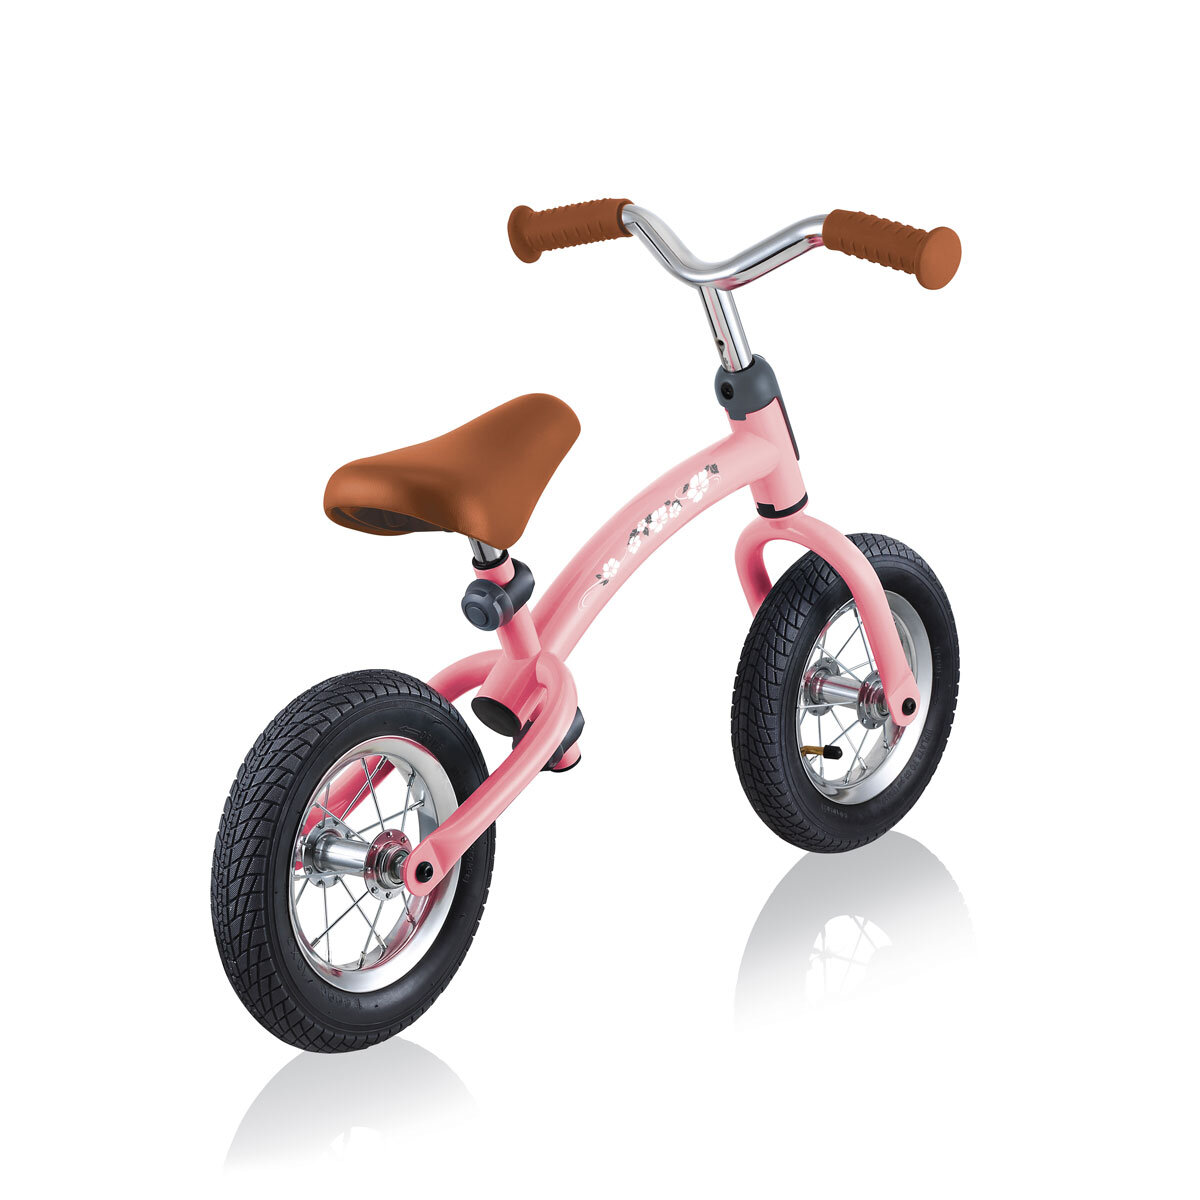 Buy Globber Go Bike Air Pastel Pink Overview6 Image at Costco.co.uk